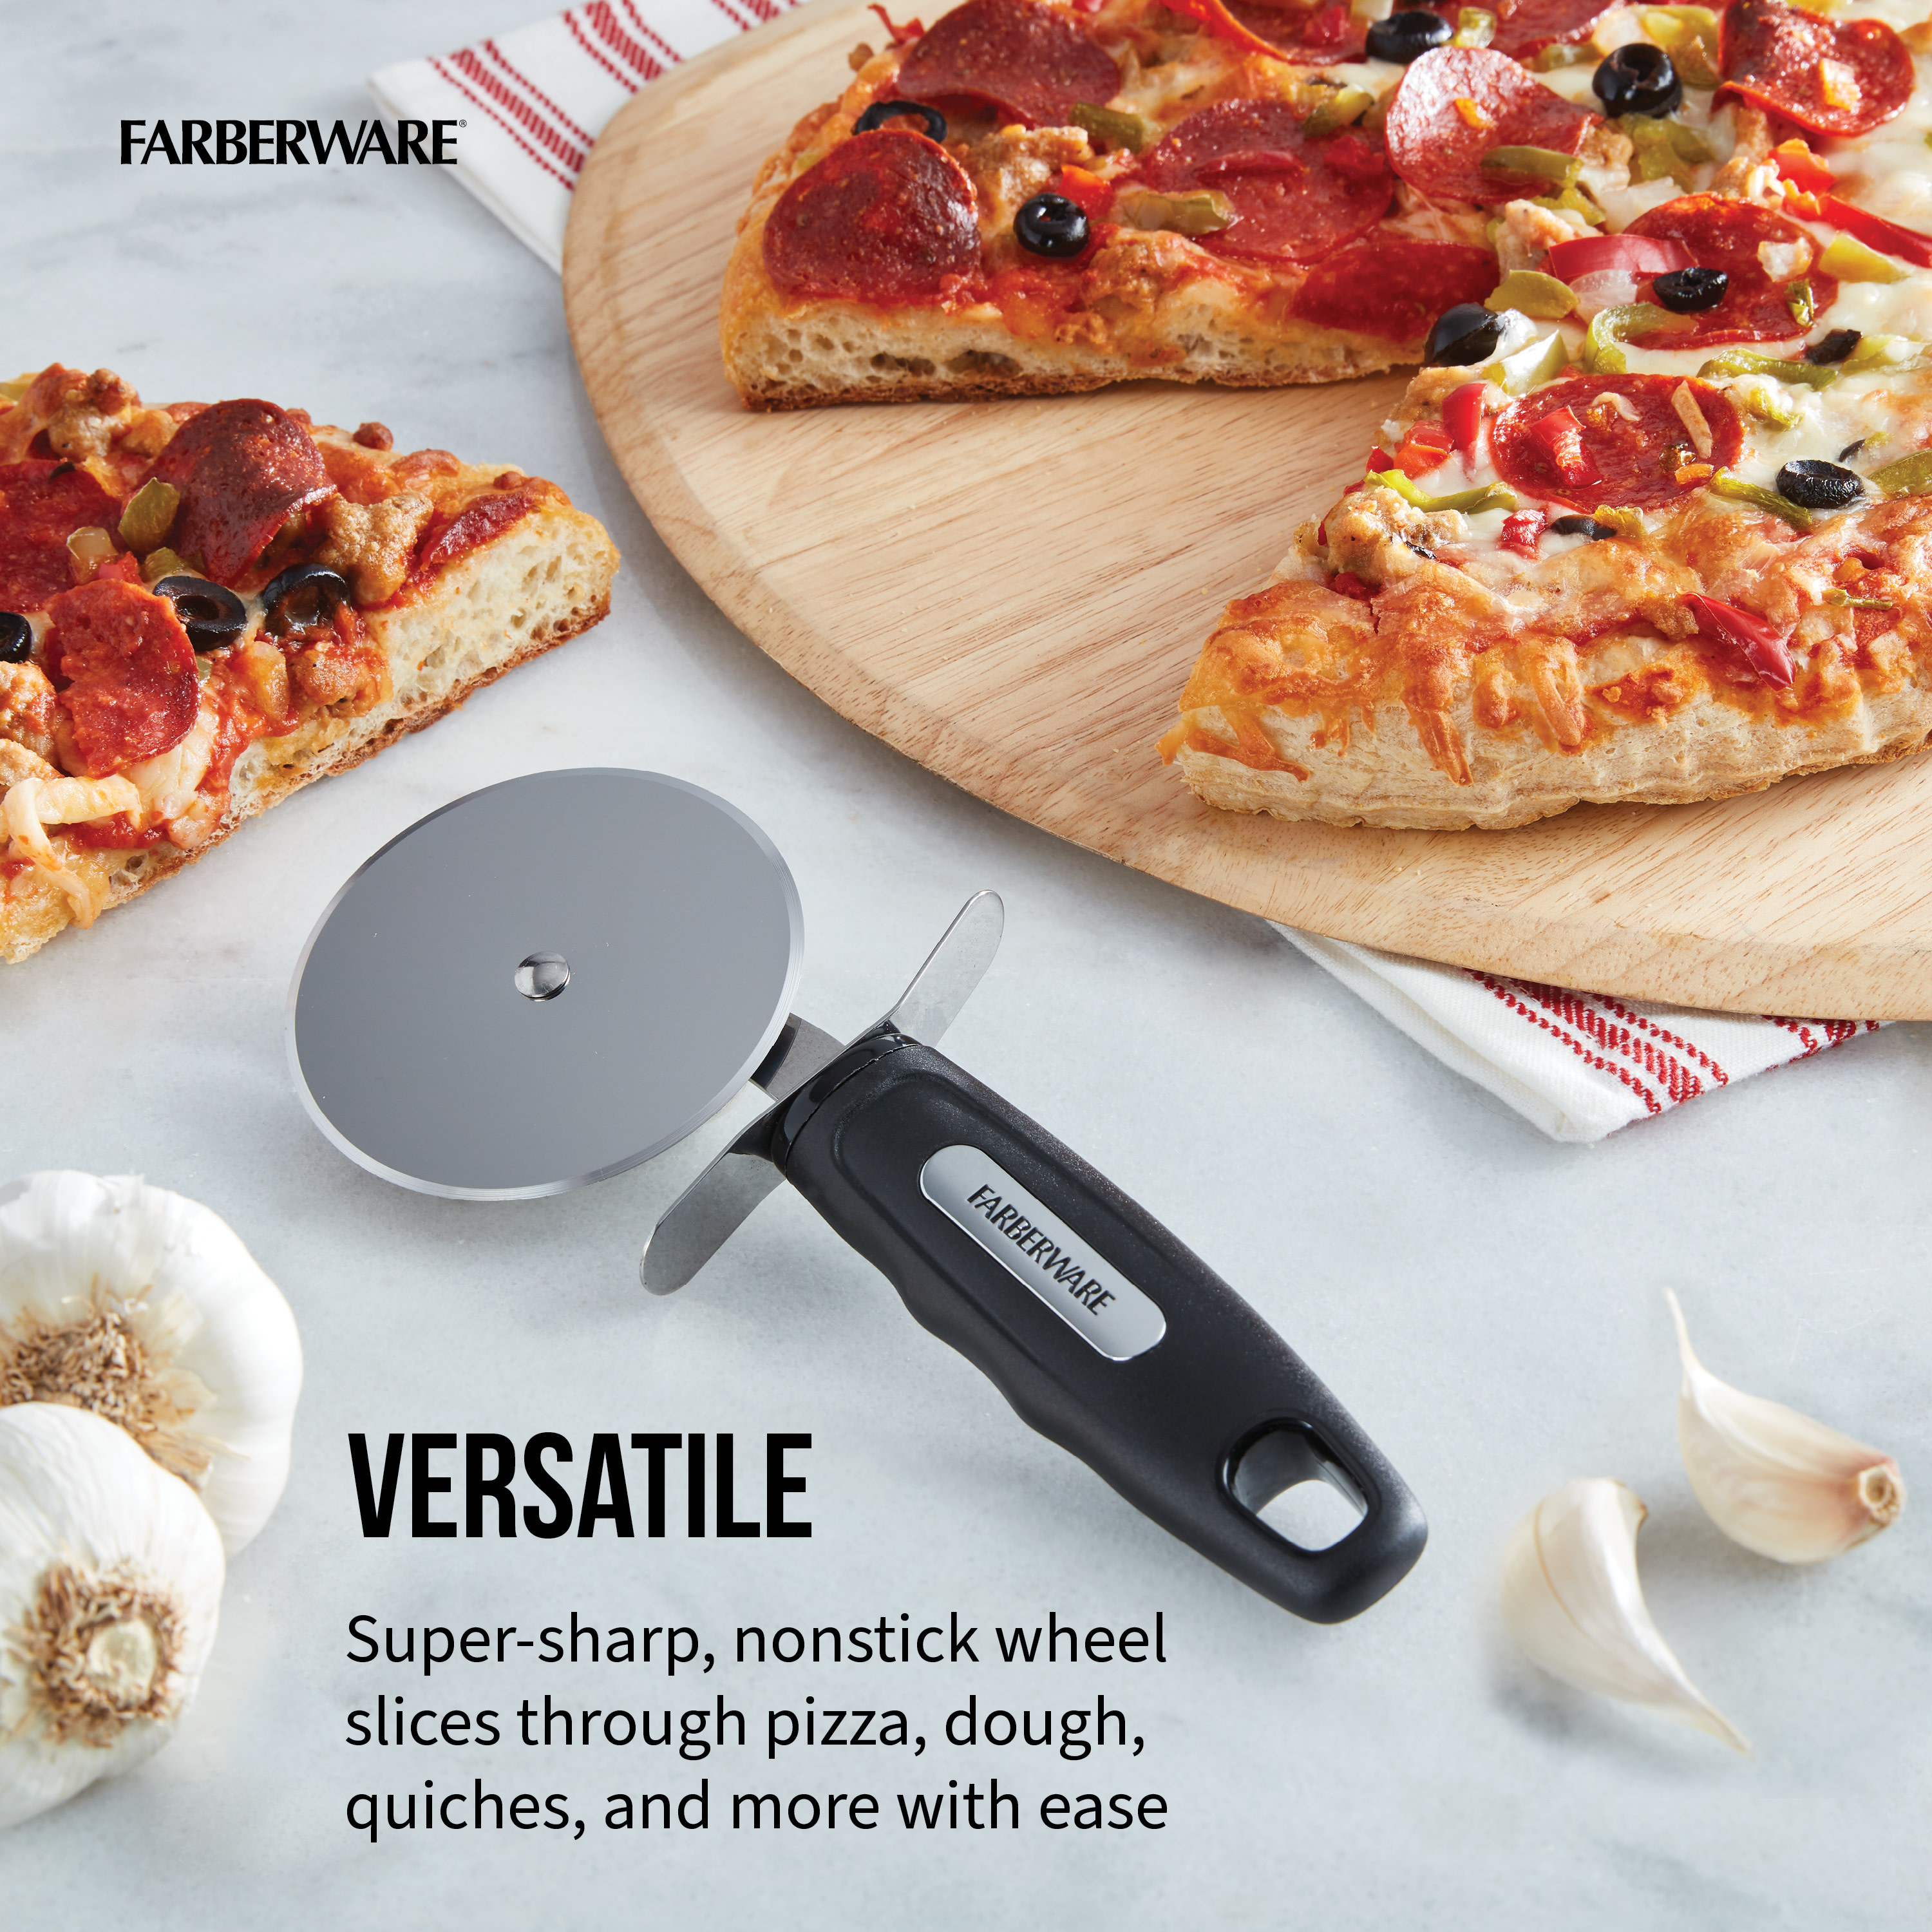 Stainless steel pizza cutter with a black handle next to a pizza